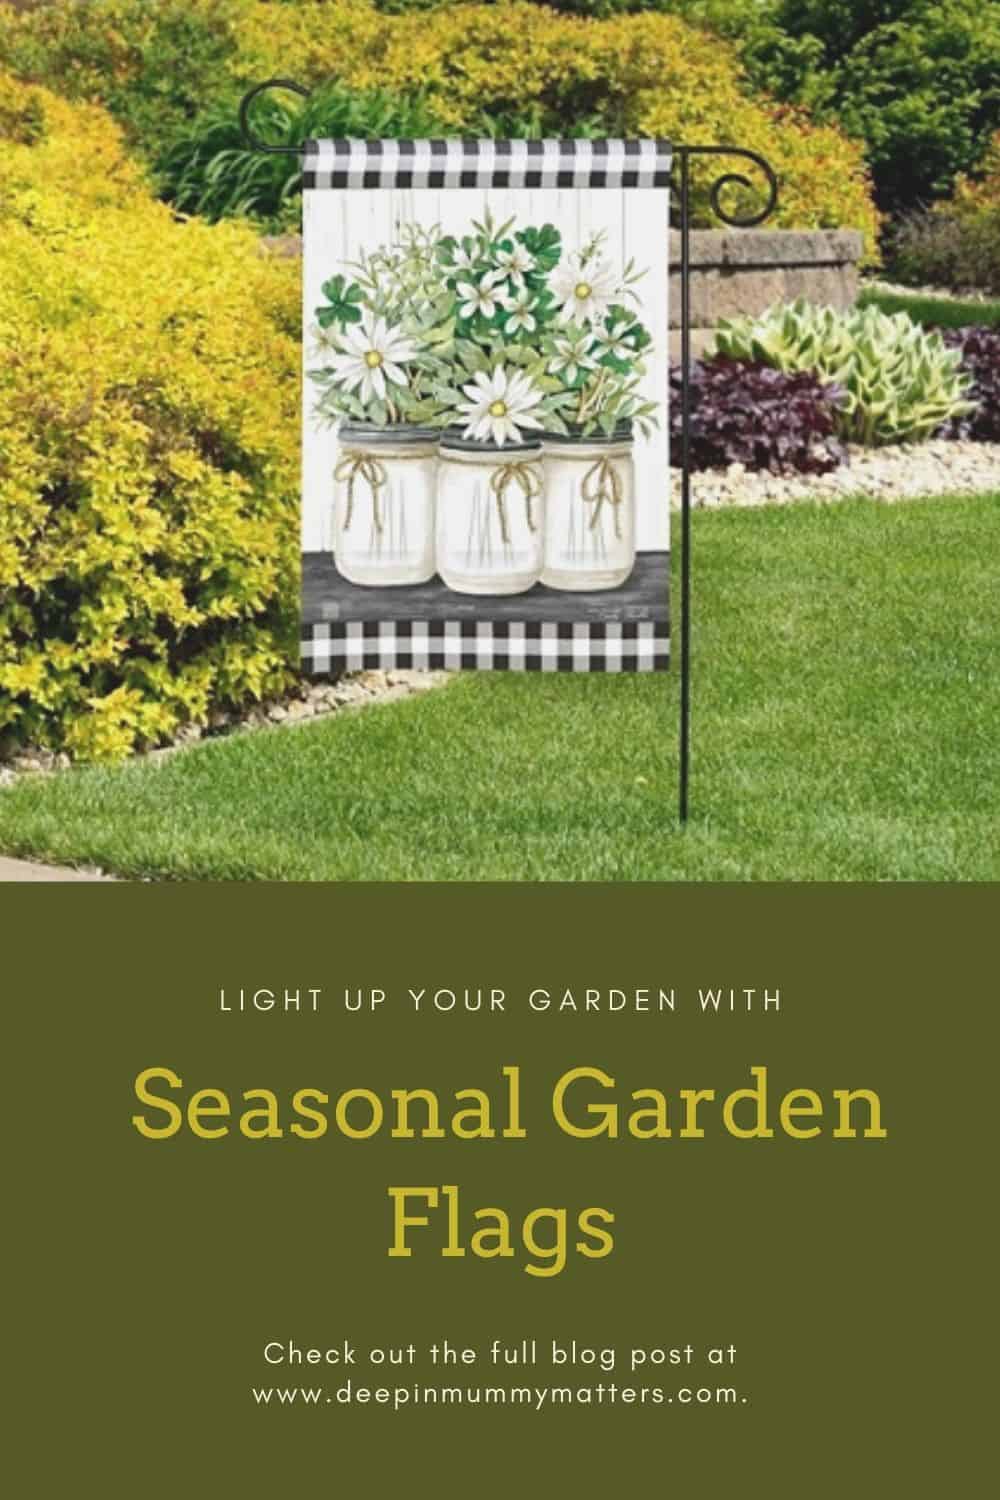 Add some colour to your garden and make your gardening more fanciful, by adding custom garden flags that bear the unmissable signature of your taste. 